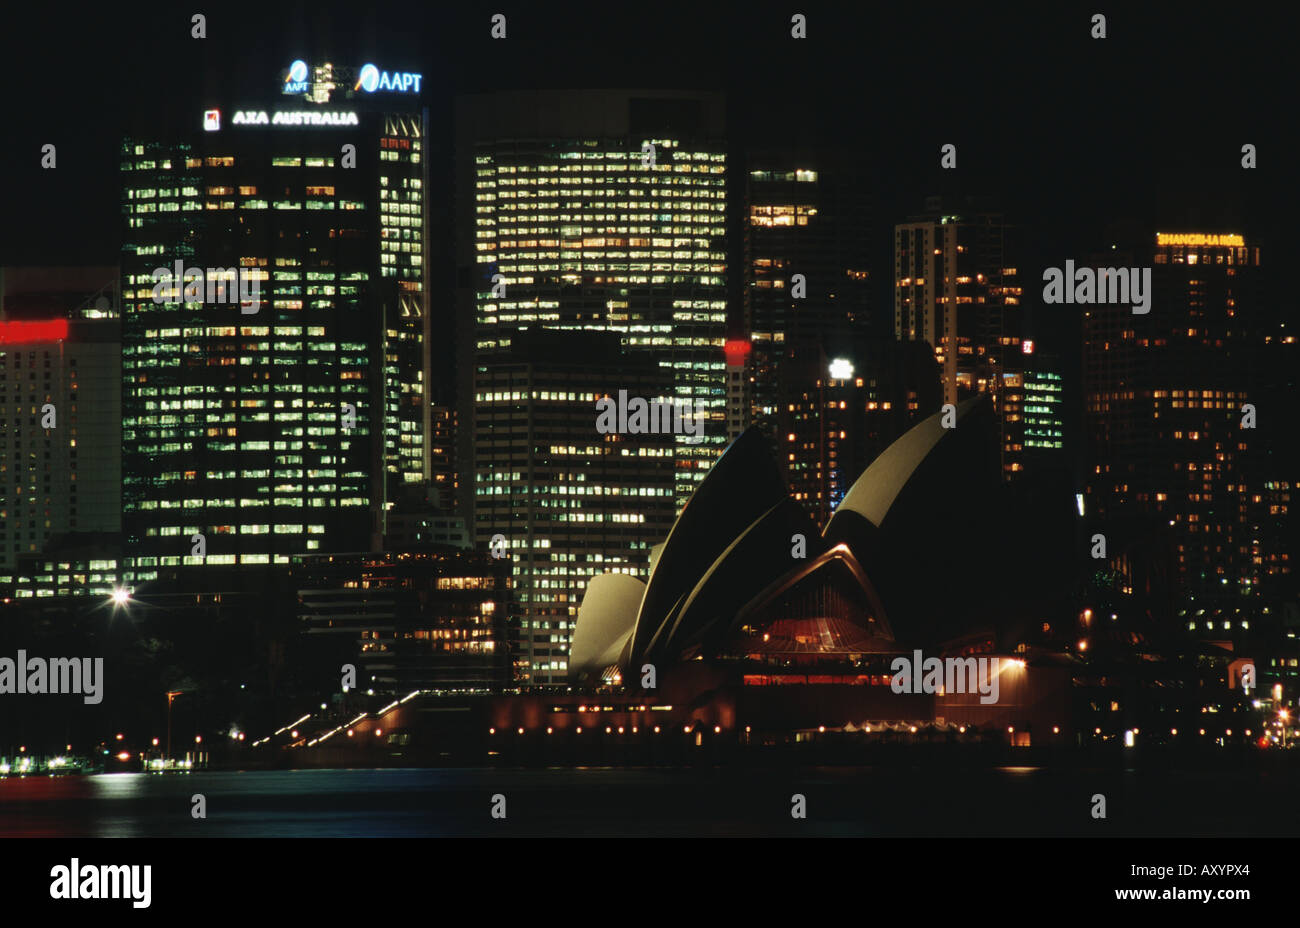 view from Cremorne Wharf to the skyline of Sidney with the opera at night, Australia, New South Wales, Sydney Stock Photo